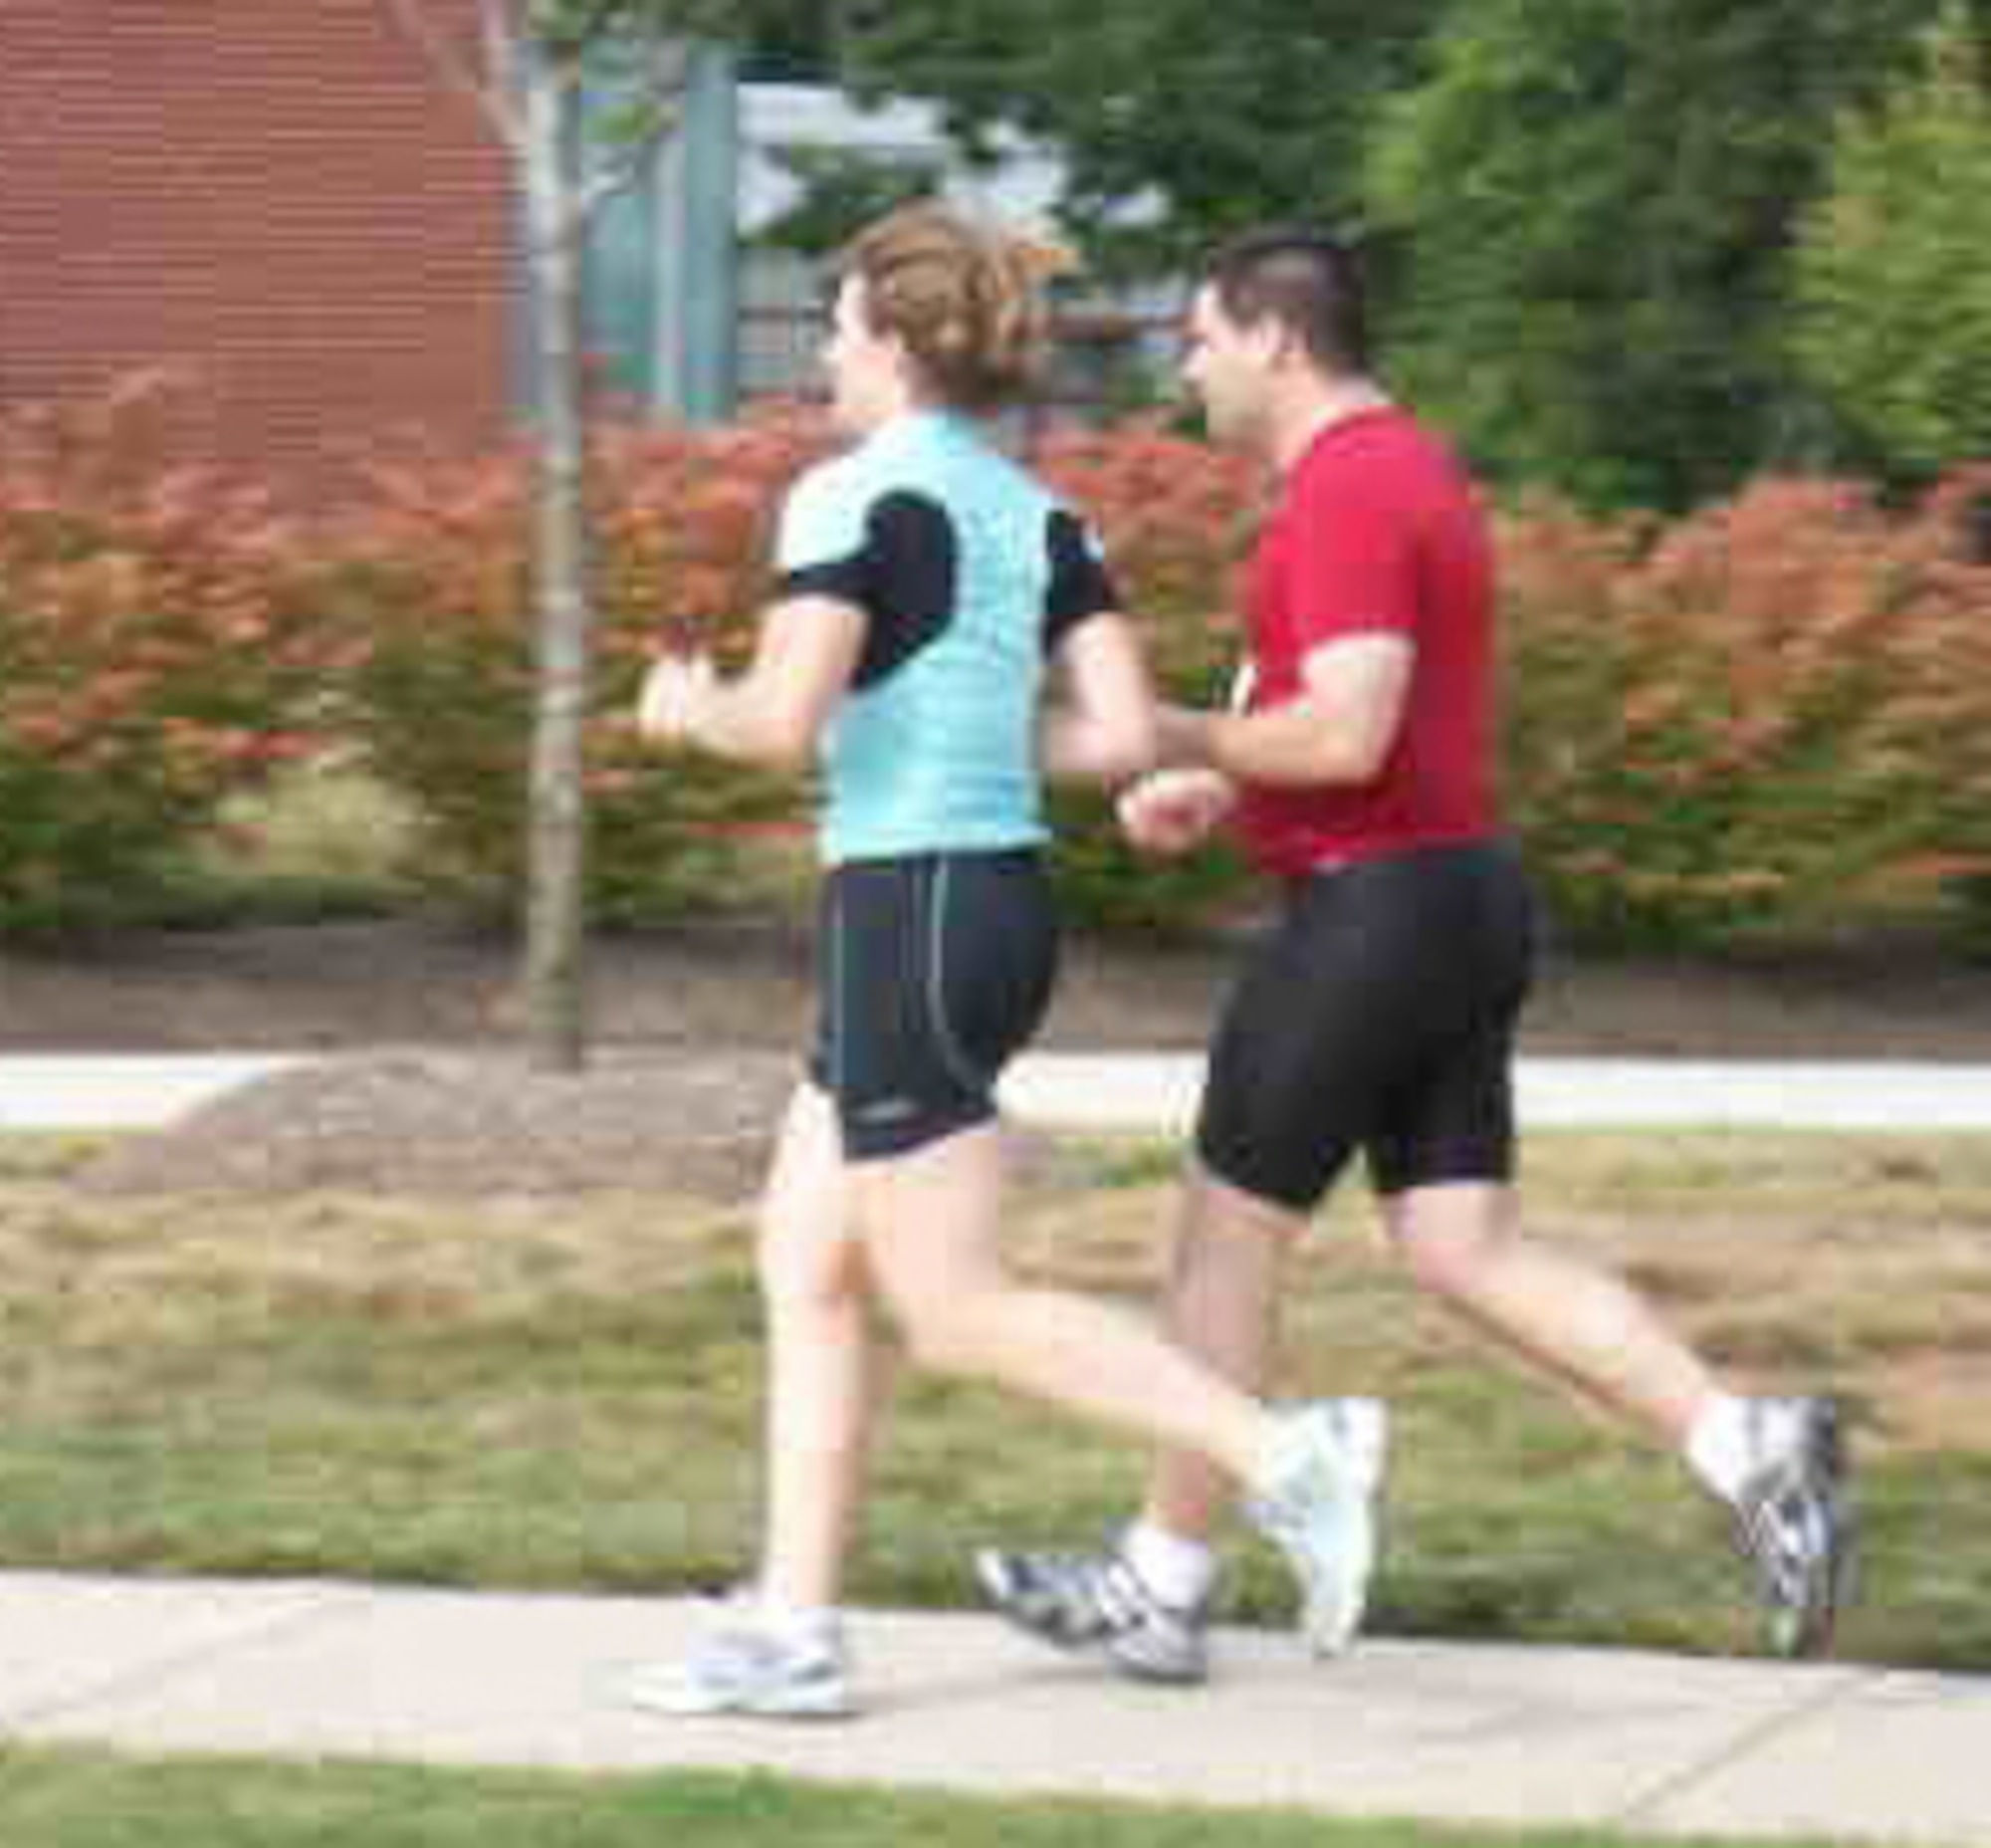 Maj. Kelli Molter, aide-de-camp to the commander of Air Force Reserve Command in the Pentagon, runs with her friend Chad Fenton. Mr. Fenton, who is blind, is personally trained and coached by Major Molter, who uses her Ironman experiences to assist physically disabled individuals compete in sporting events. (Courtesy photo)